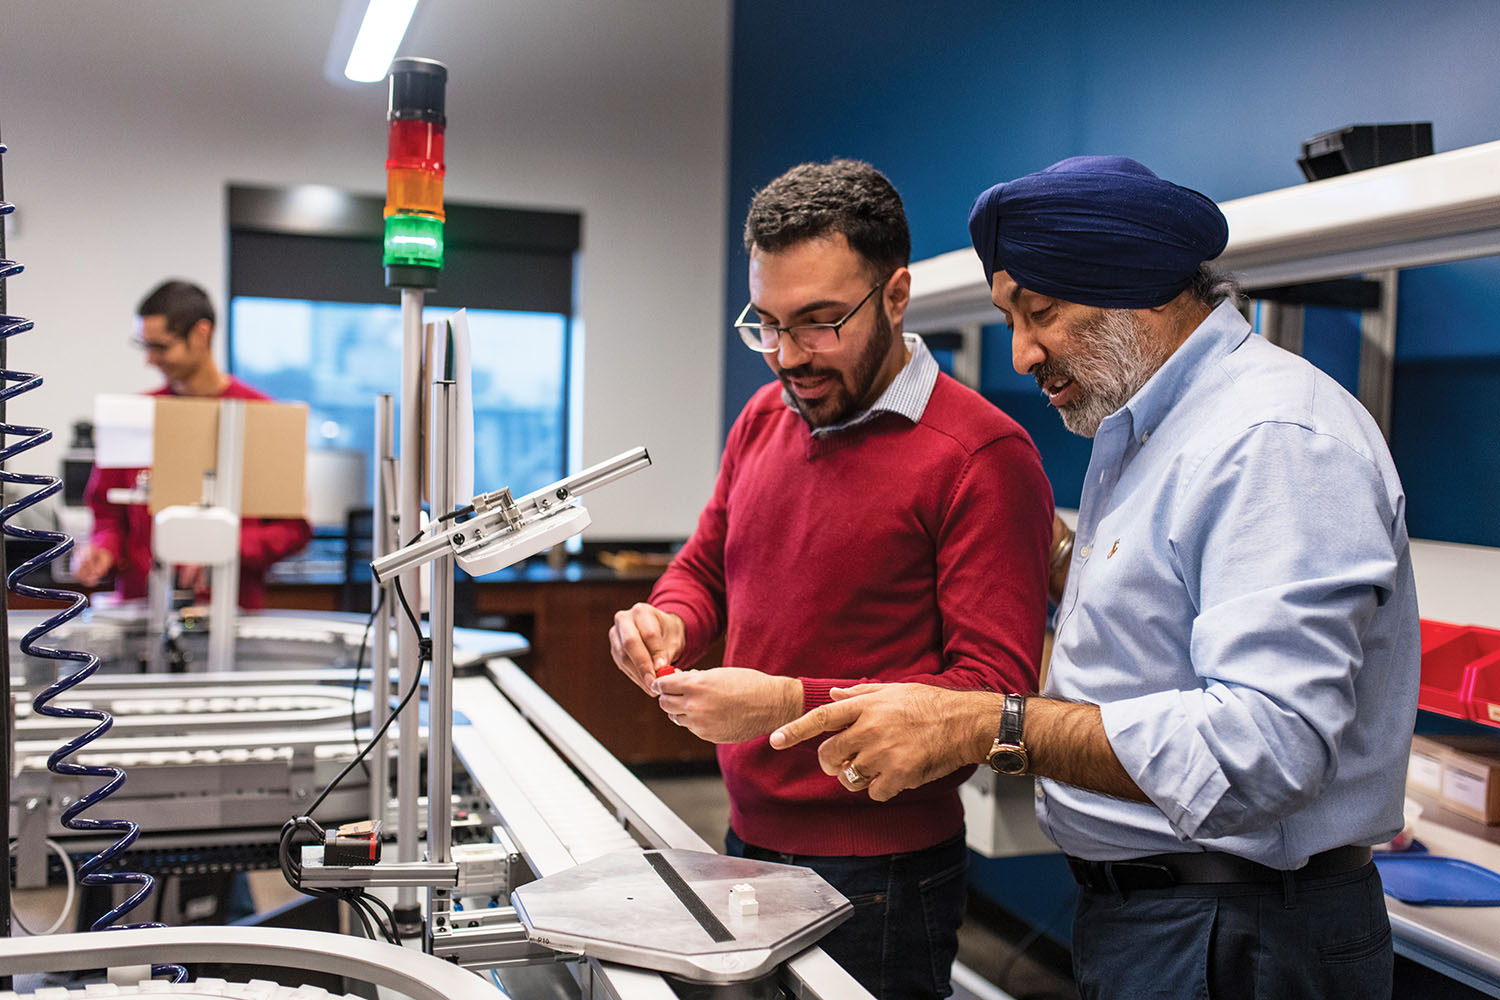 Rupy Sawhney works with a researcher in a lab.